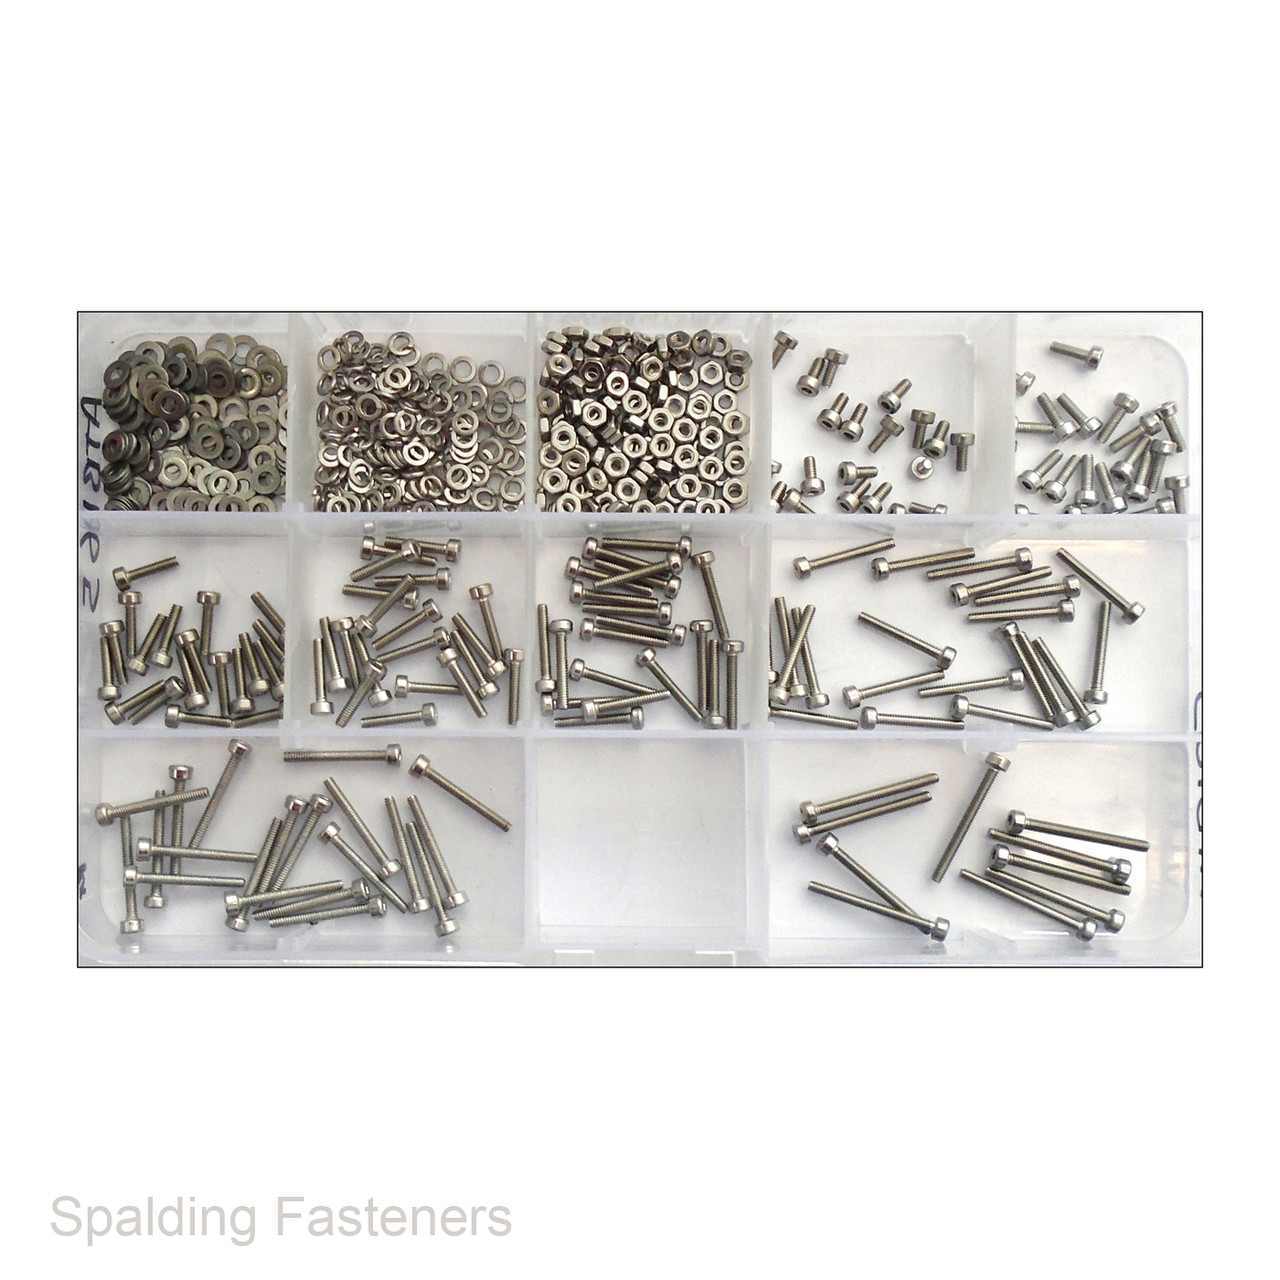 Assorted Metric M2 A2 Stainless Socket Cap Set Screws, Nuts & Washers